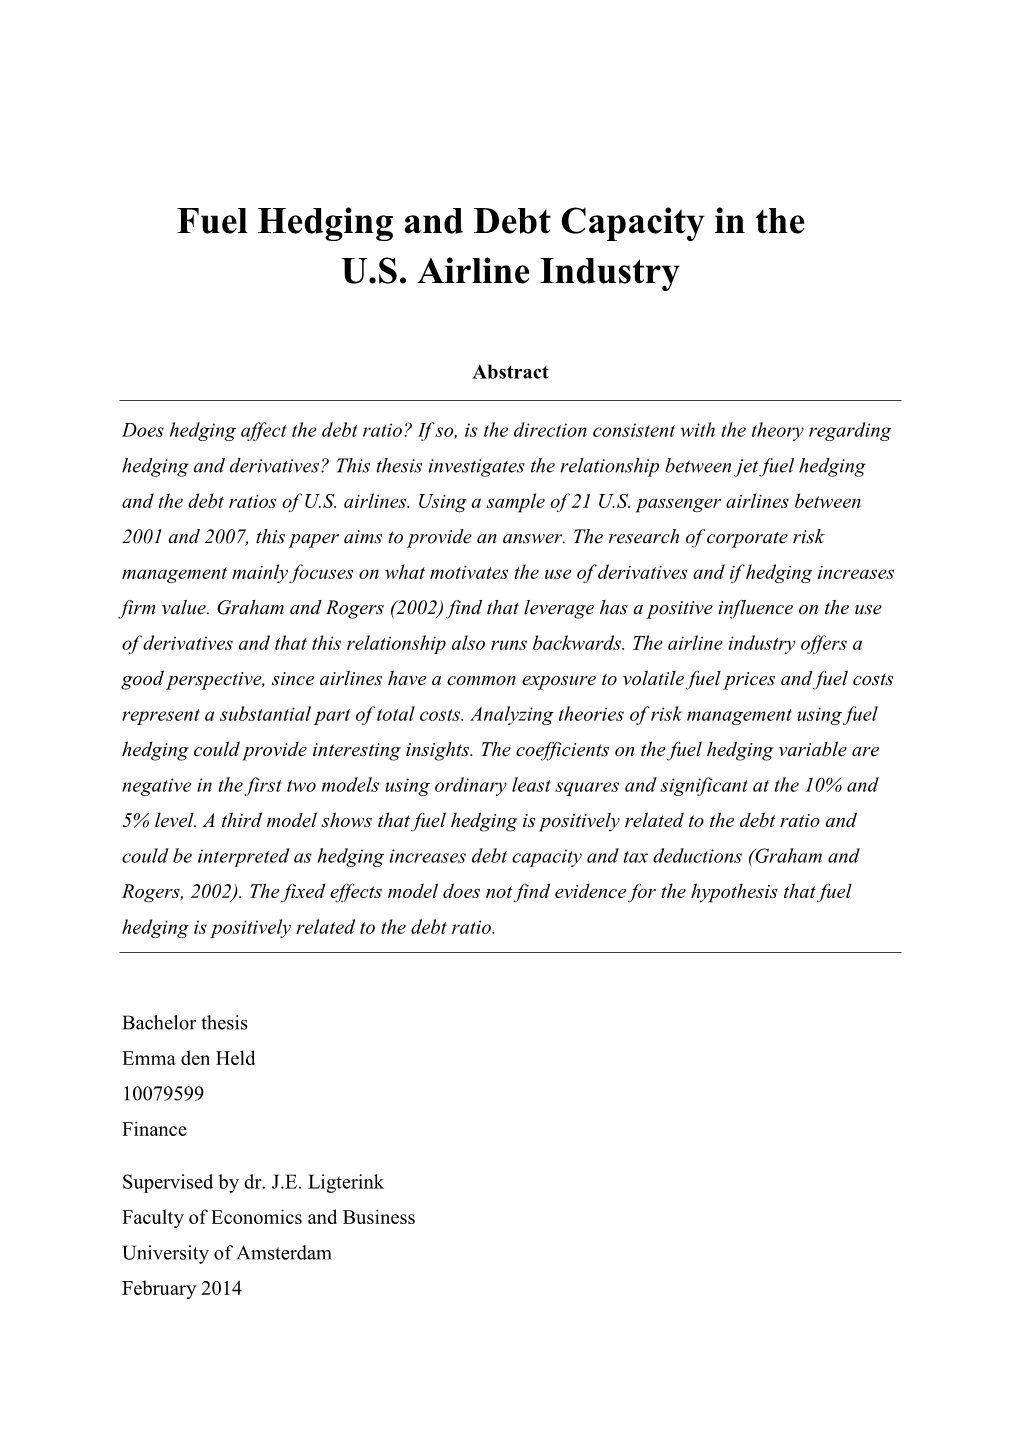 Fuel Hedging and Debt Capacity in the U.S. Airline Industry